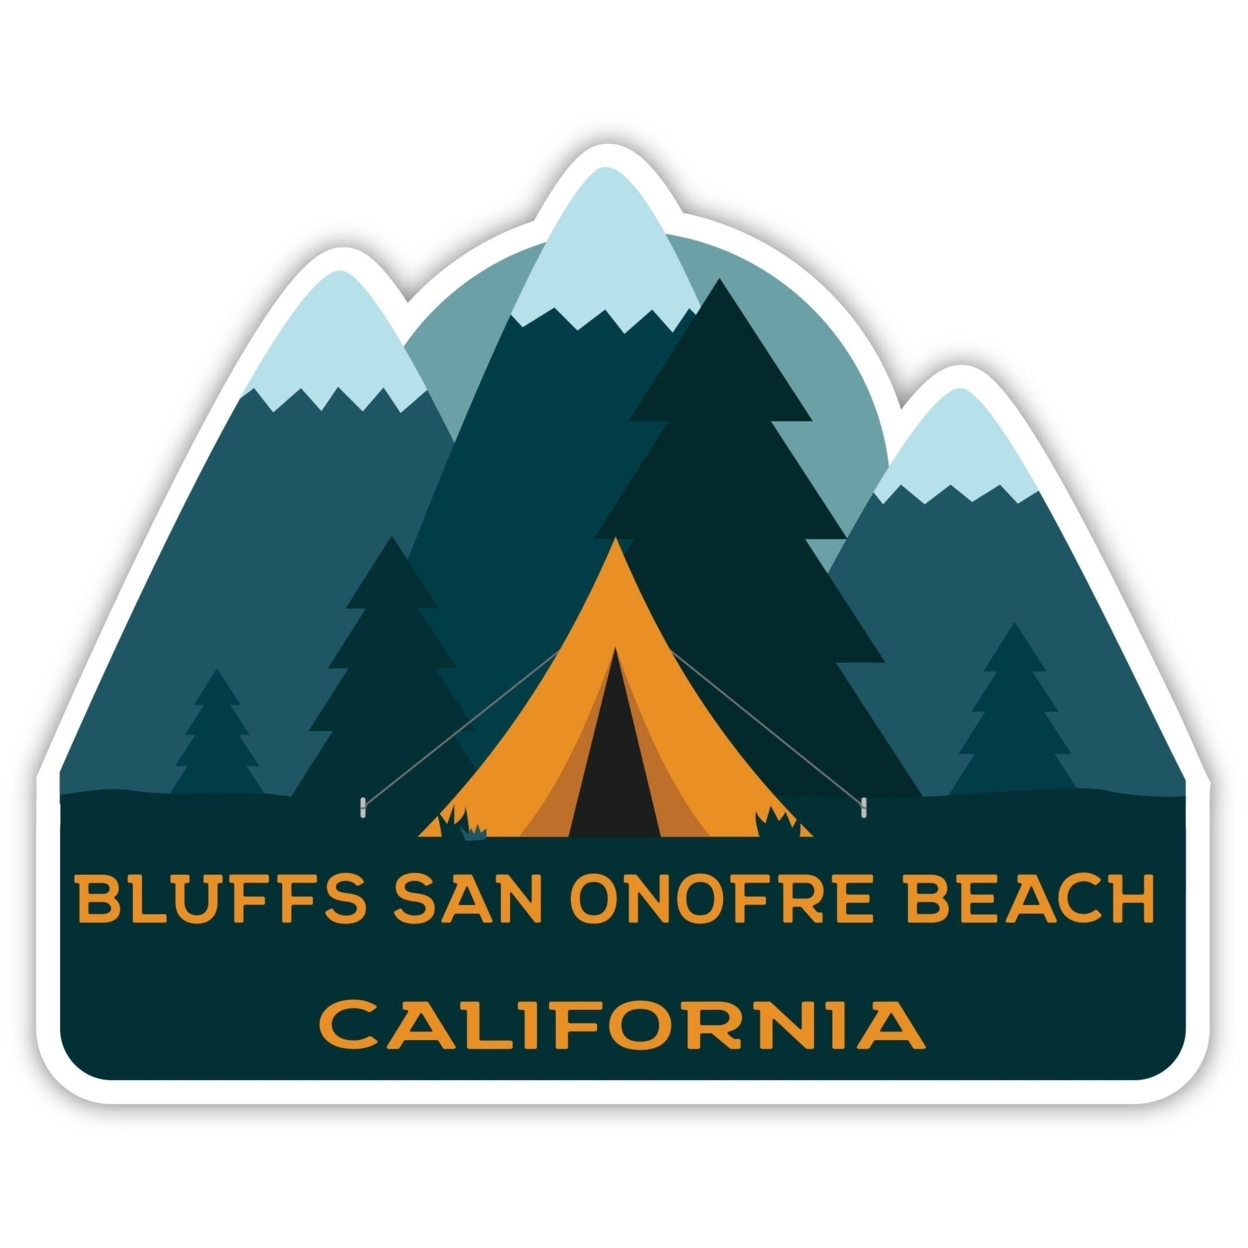 Bluffs San Onofre Beach California Souvenir Decorative Stickers (Choose Theme And Size) - 4-Pack, 8-Inch, Camp Life